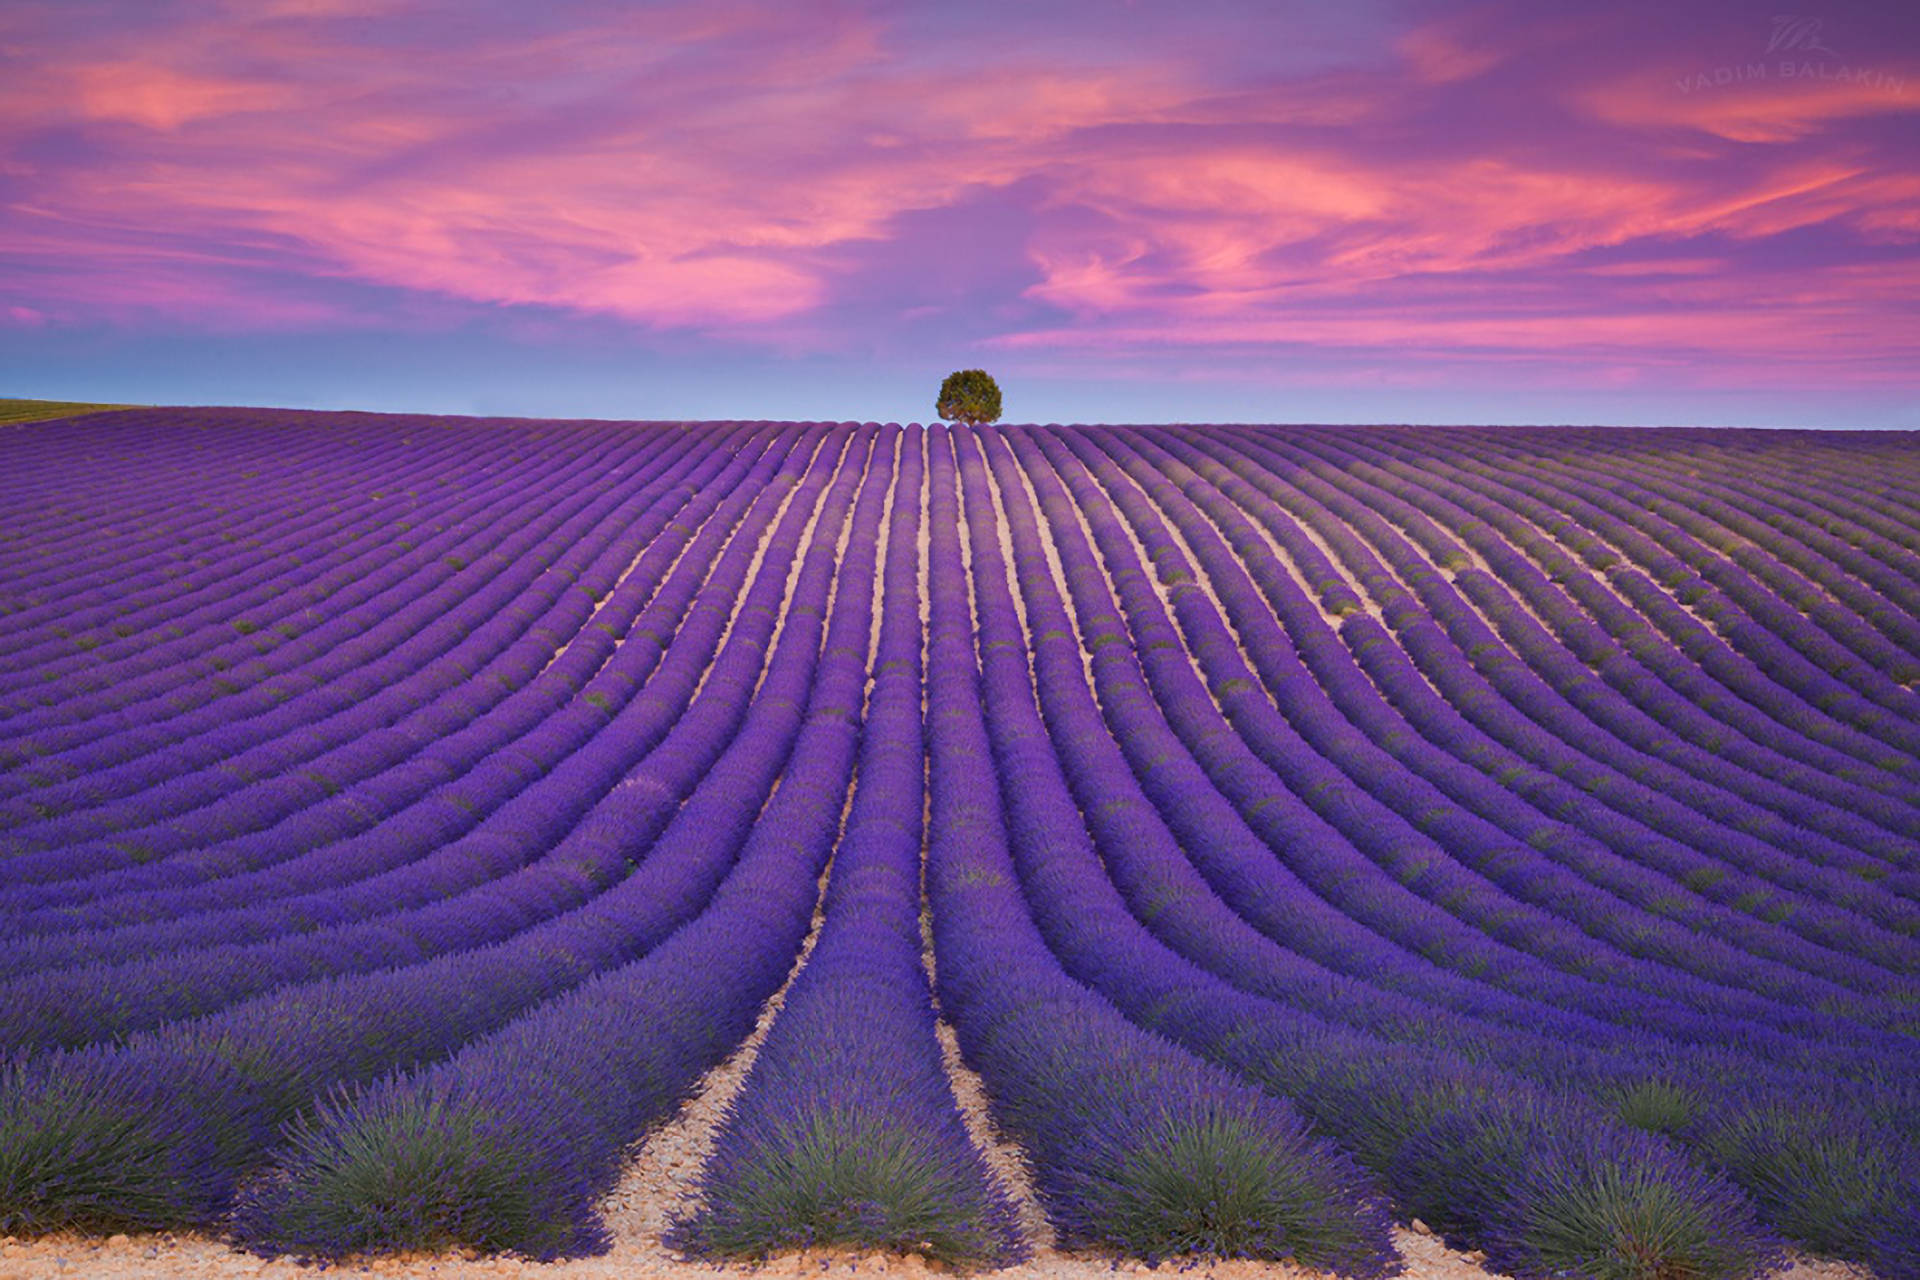 Lavender Aesthetic Neat Rows And Violet Skies